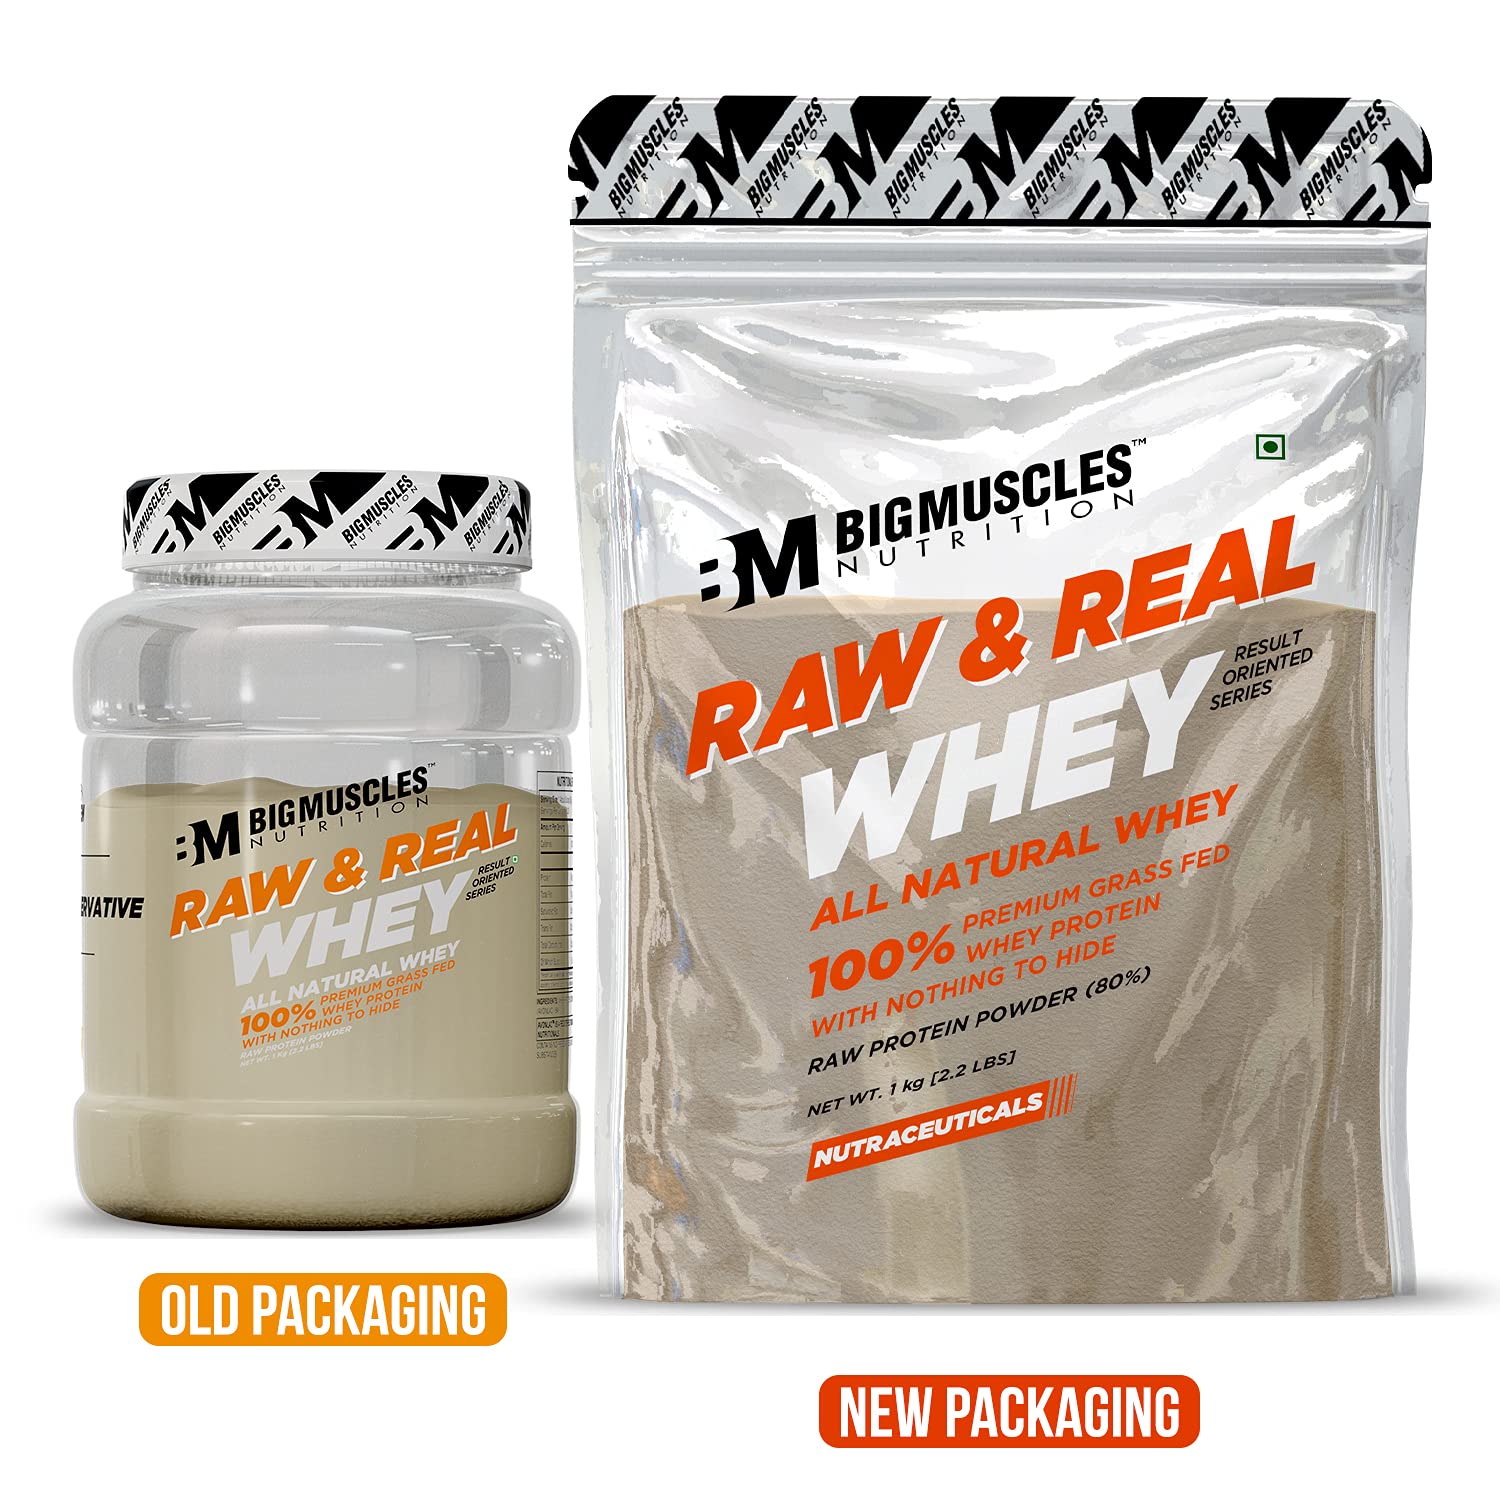 Big Muscle Nutrition Raw & Real Whey (1Kg) Unflavored